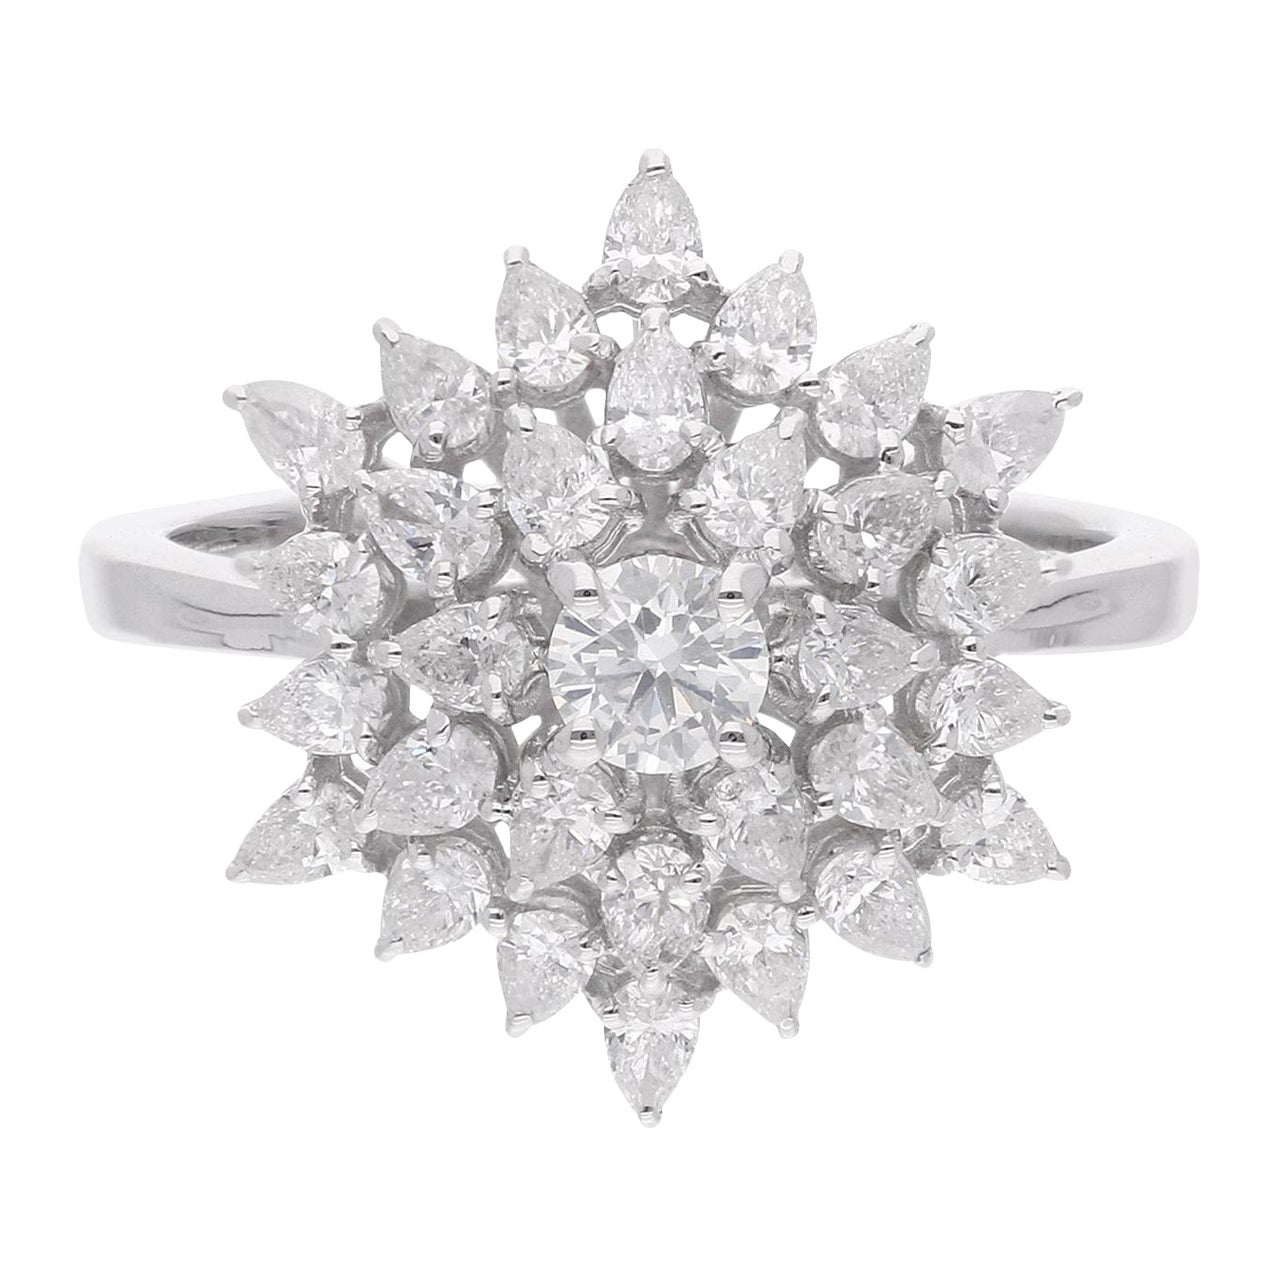 Natural 1.23 Carat Round & Pear Diamond Flower Ring 14 Karat White Gold Jewelry For Sale